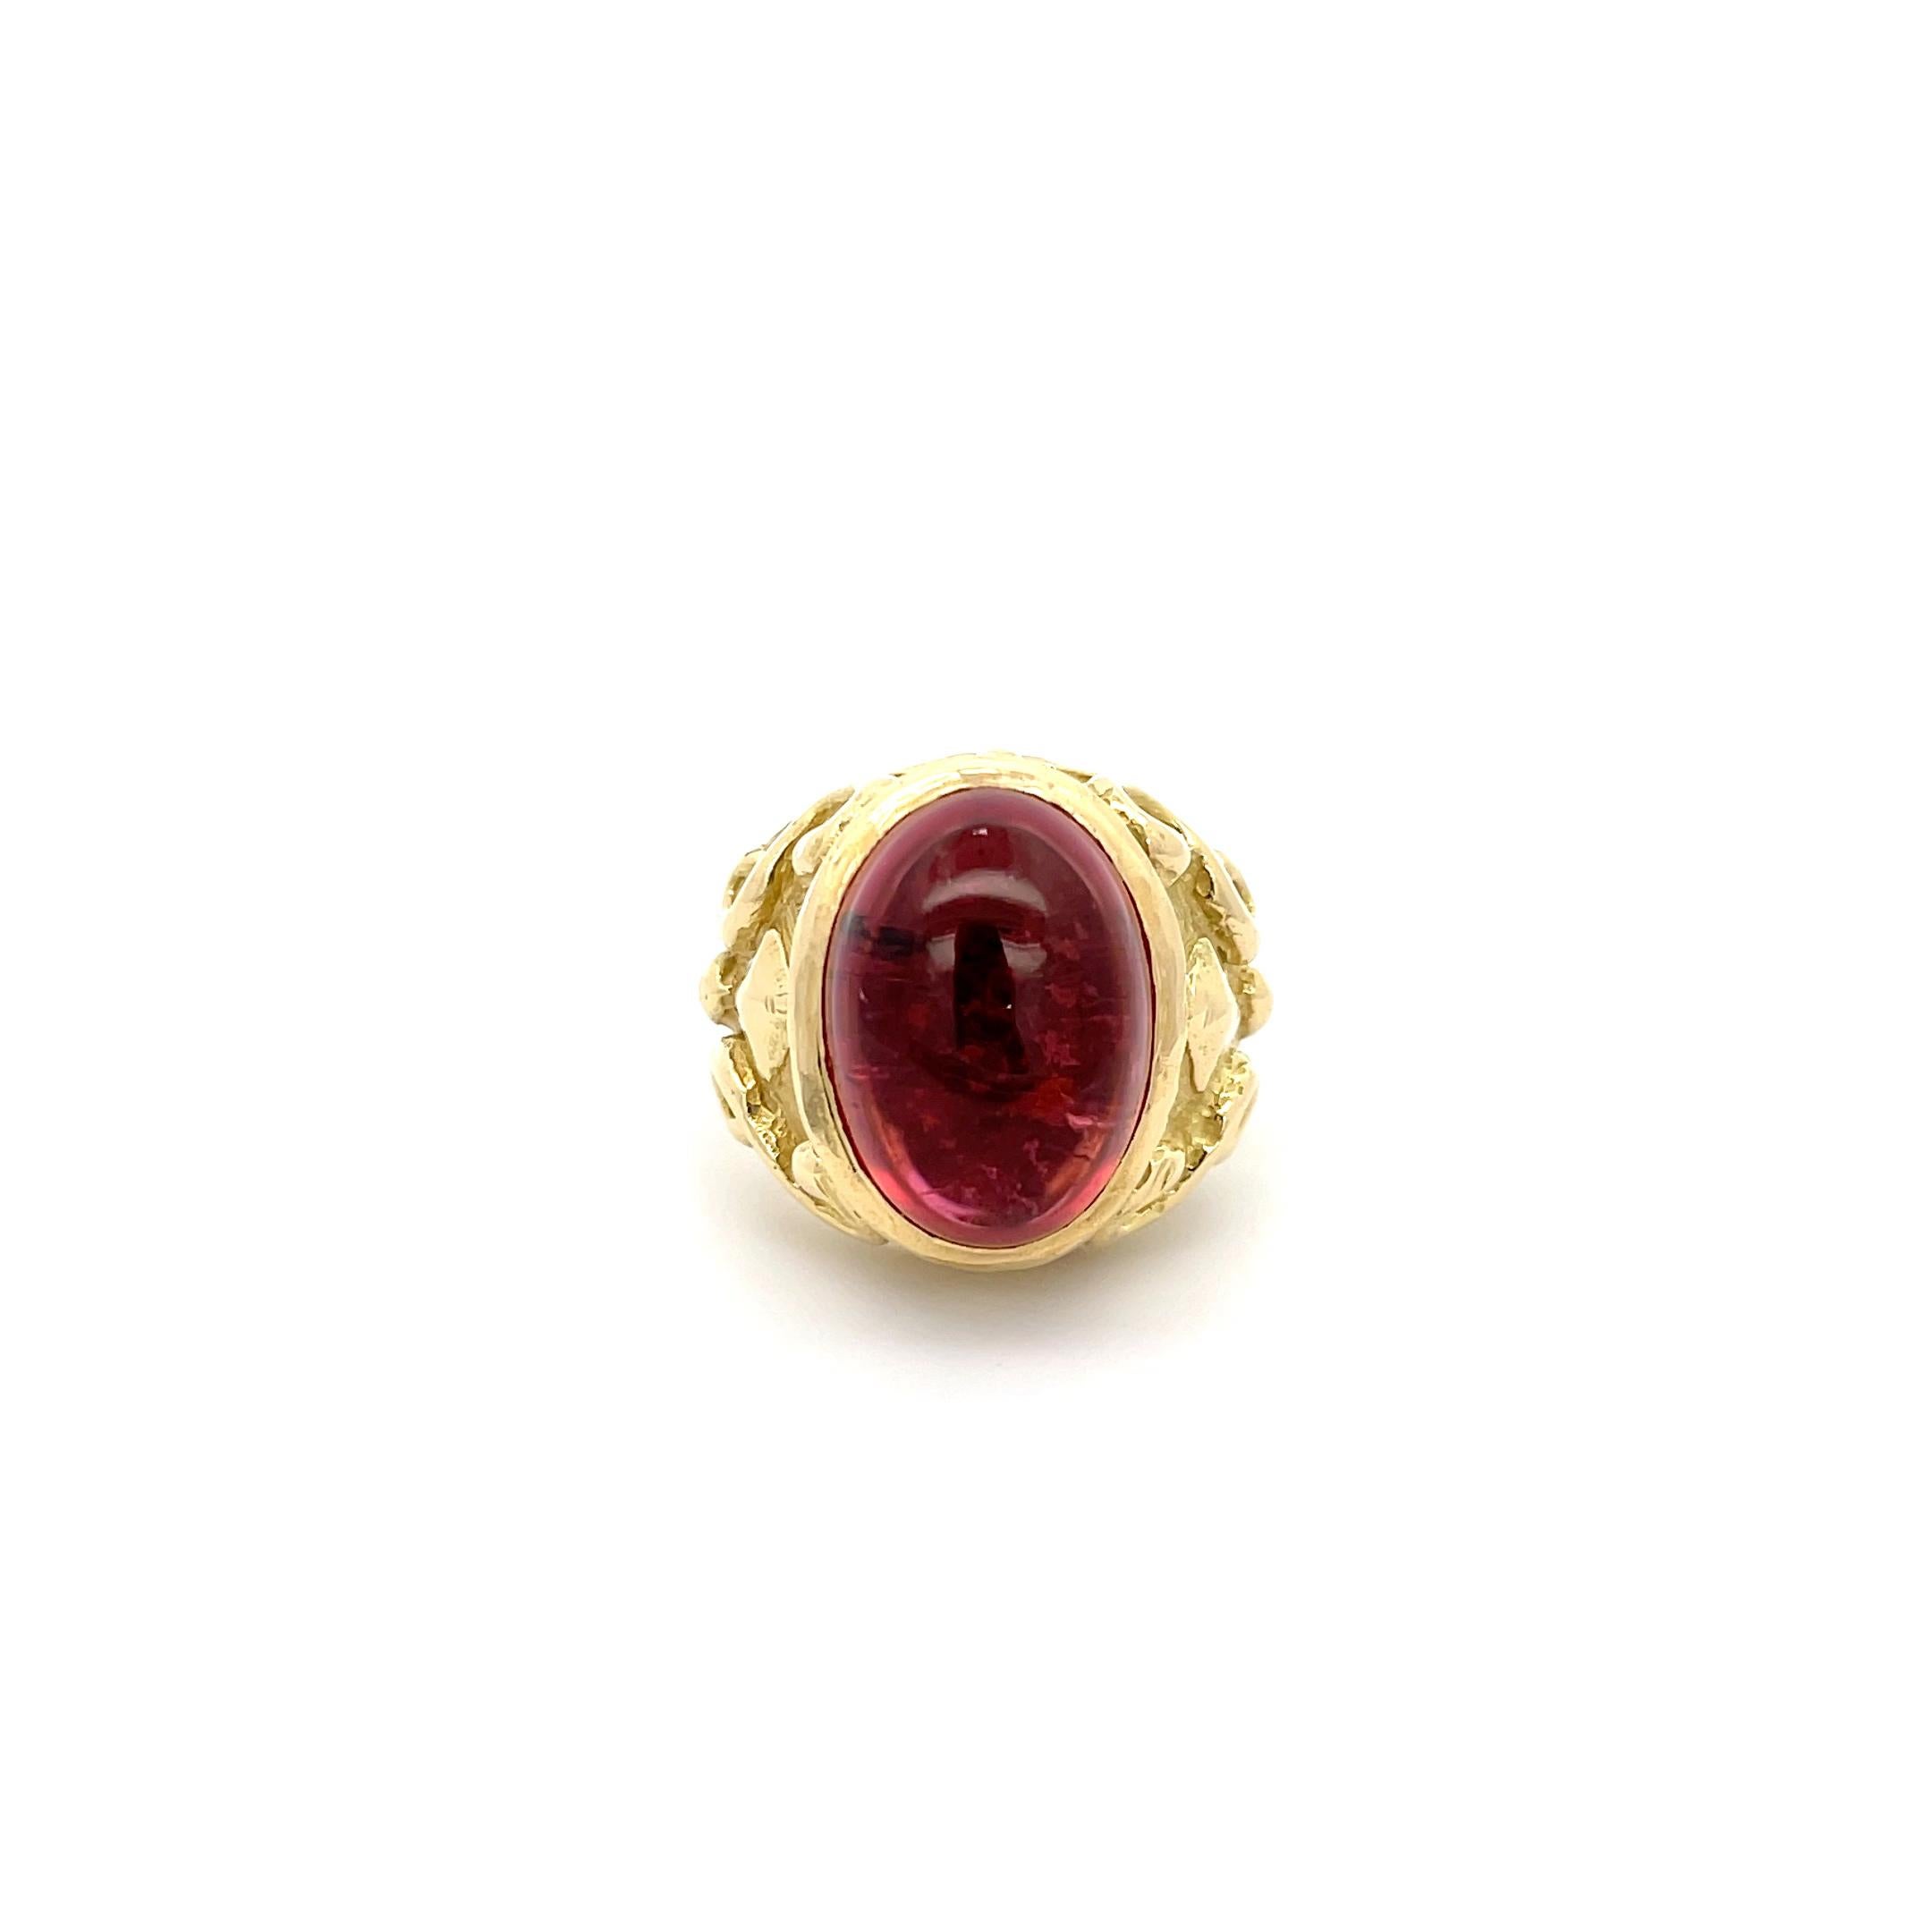 Katy Briscoe Cabochon Rubellite Ring 18K Yellow Gold  In Excellent Condition For Sale In Dallas, TX